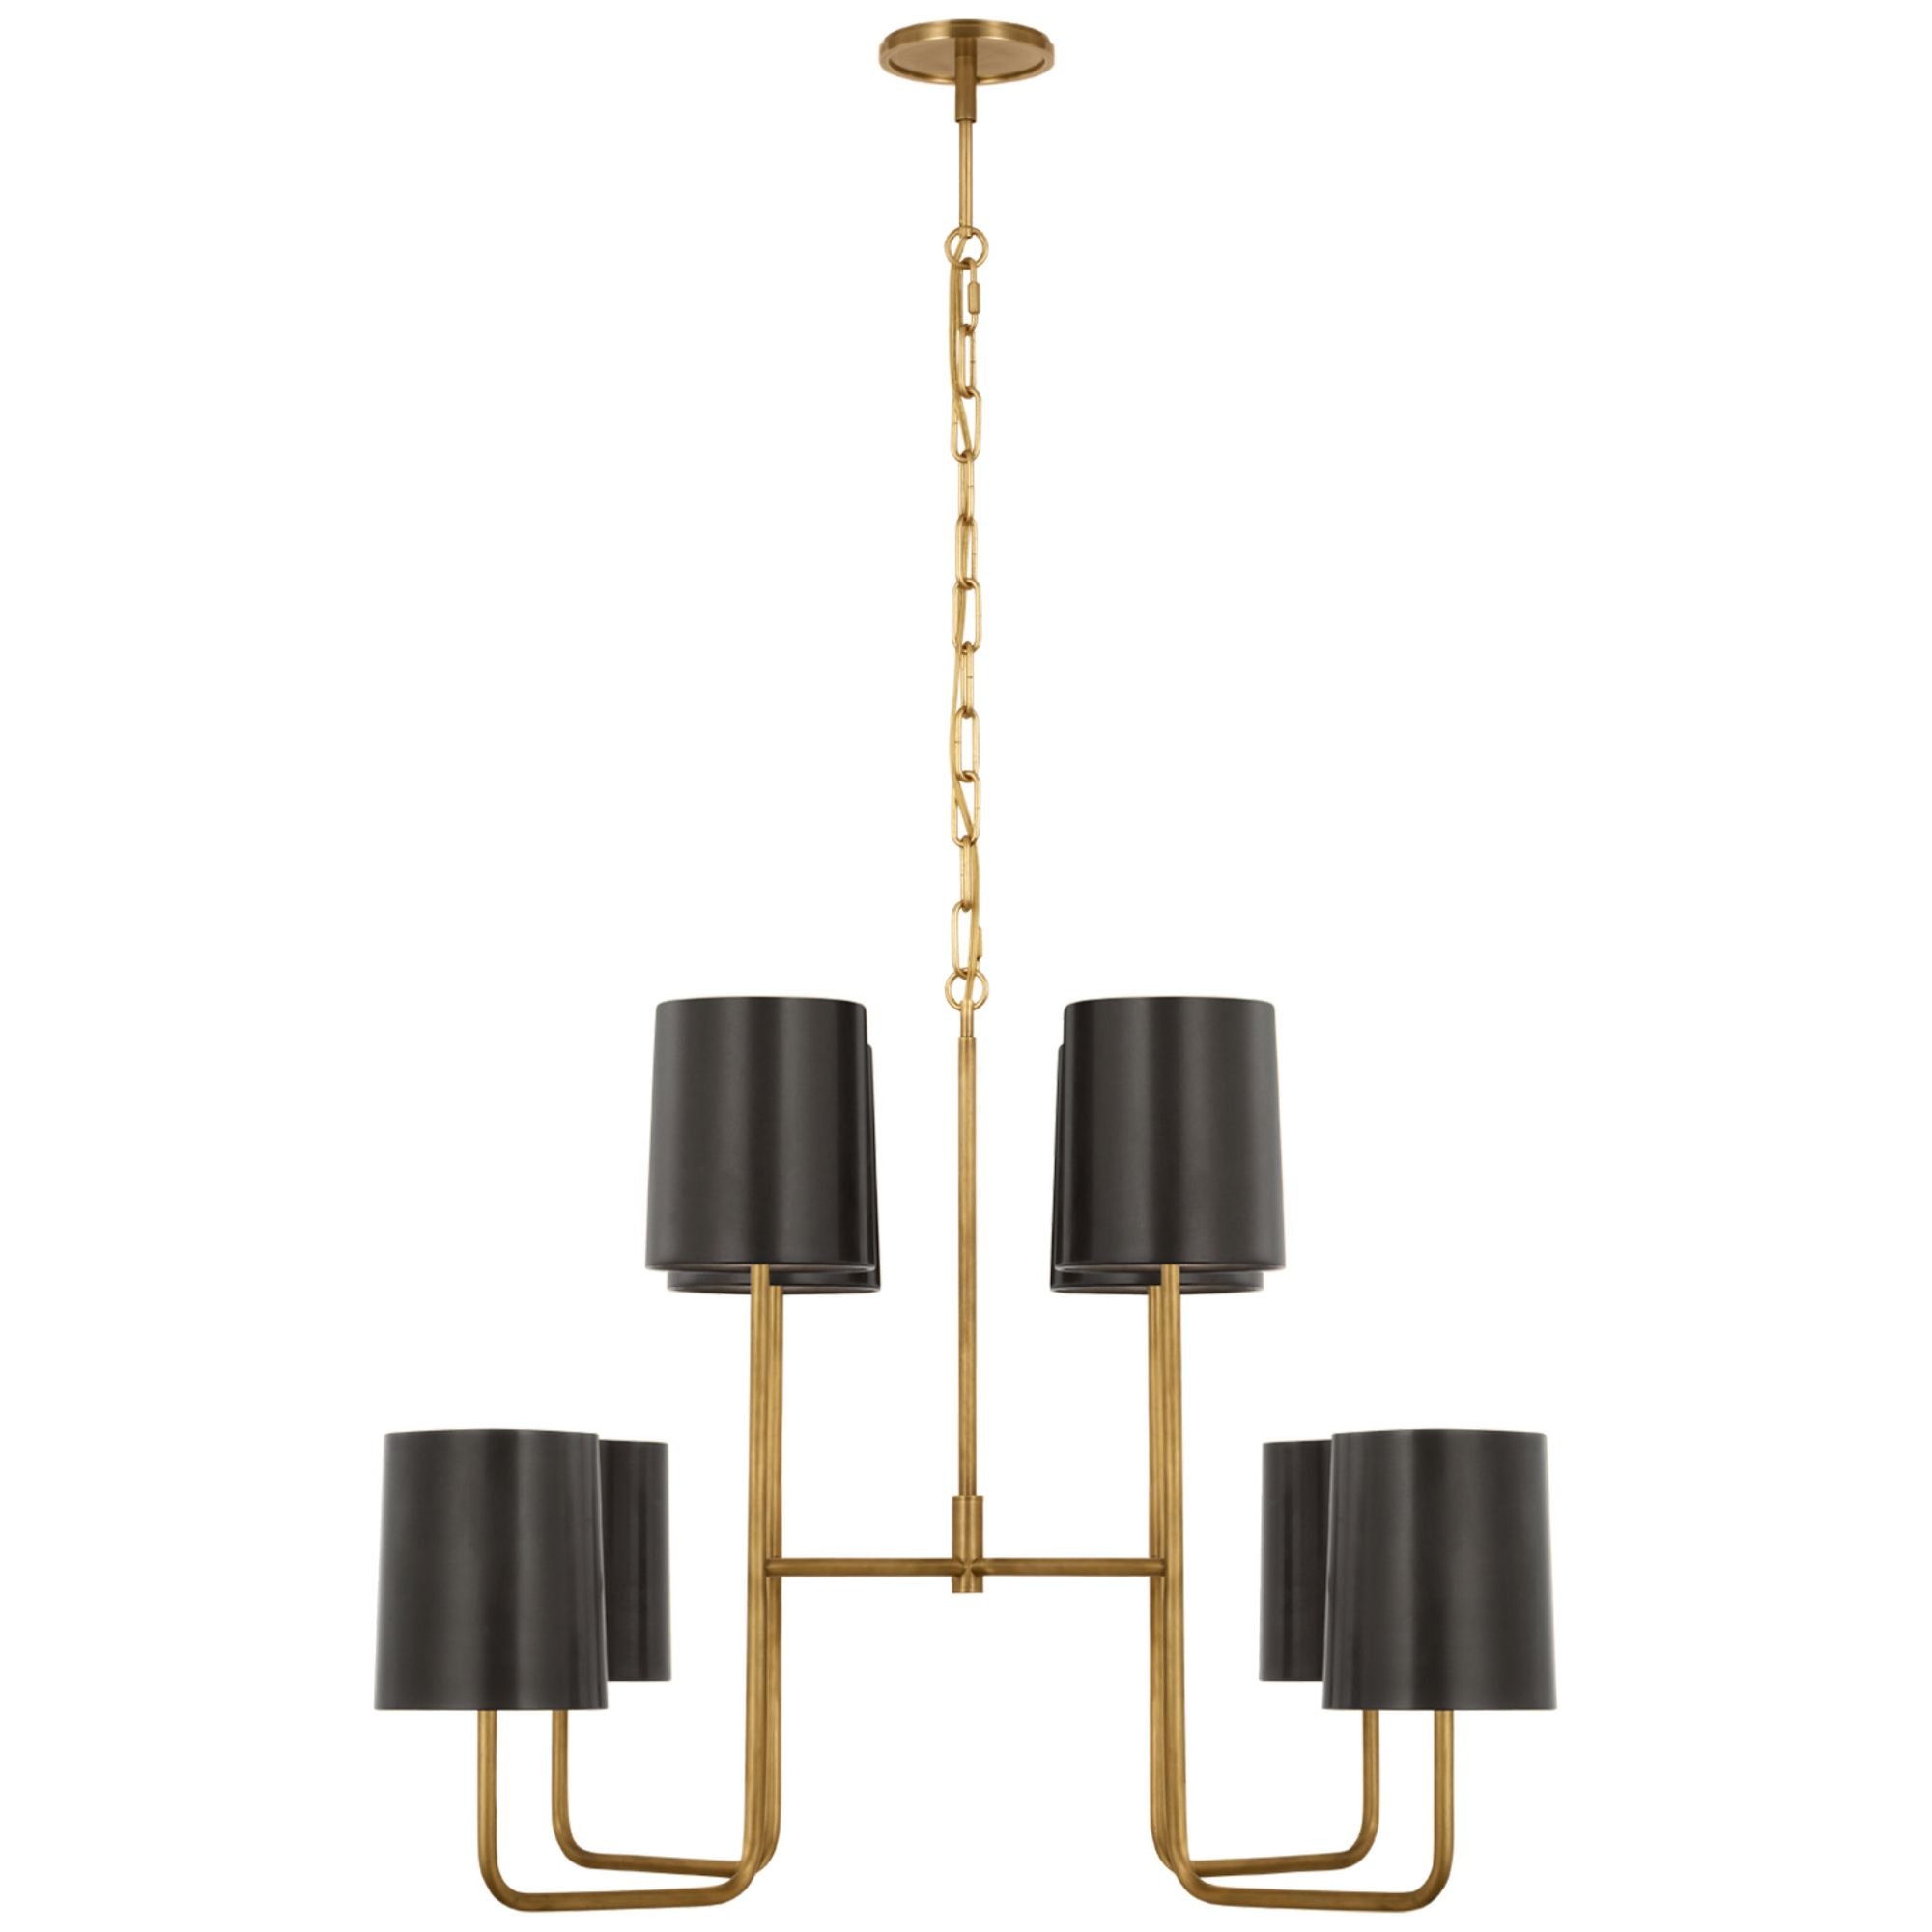 Barbara Barry Go Lightly Extra Large Two Tier Chandelier in Soft Brass with Bronze Shades